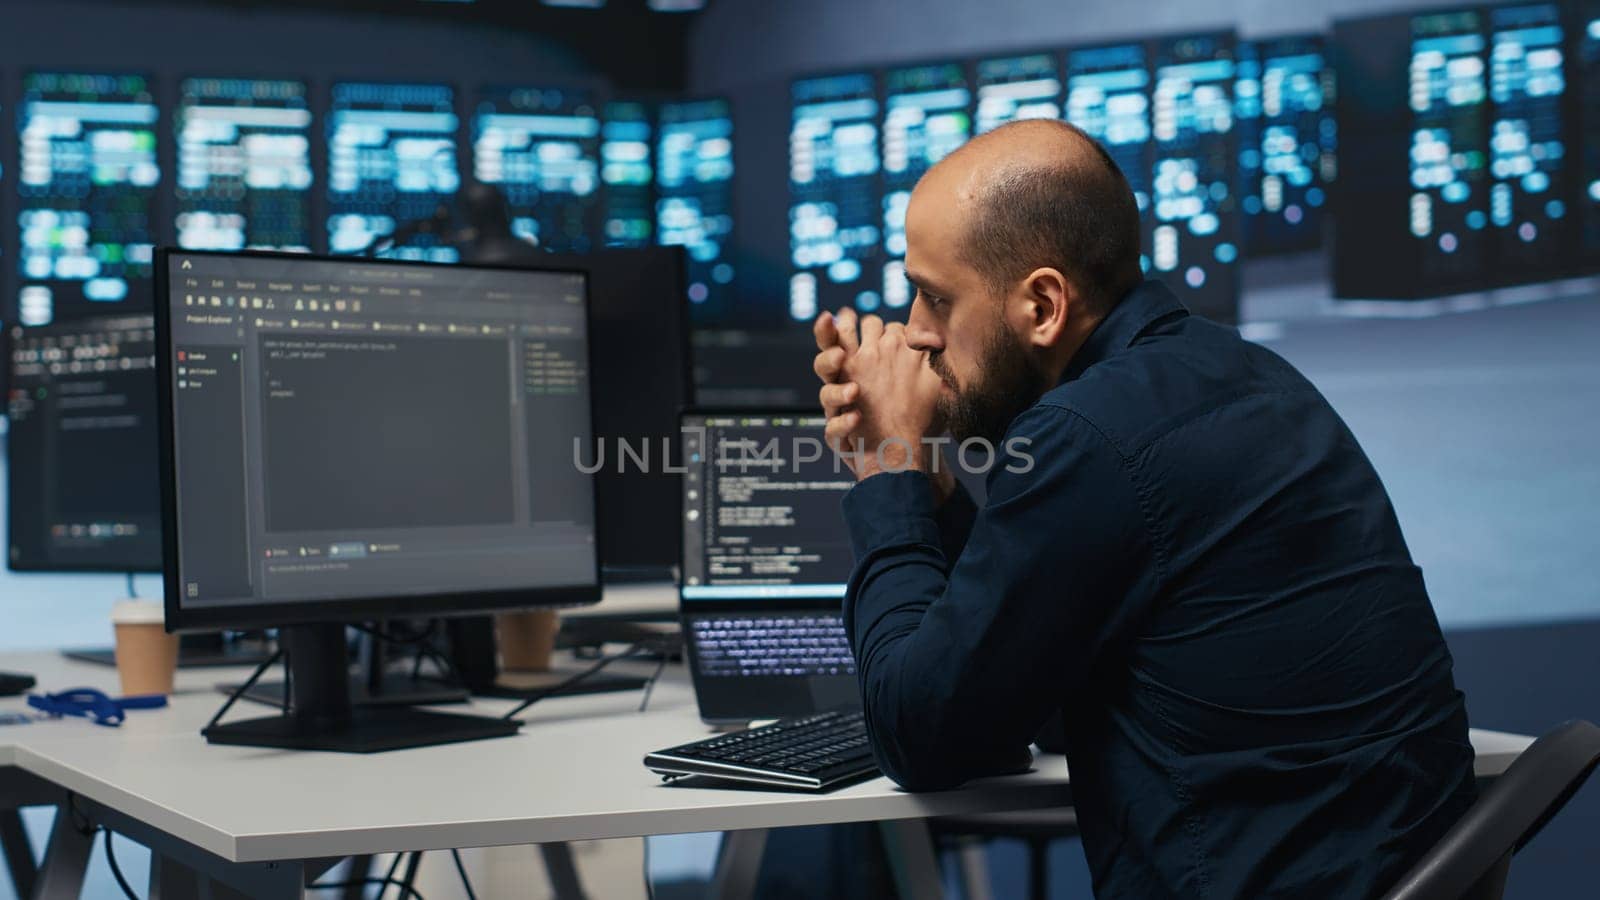 Man in server room typing code on laptop and PC by DCStudio